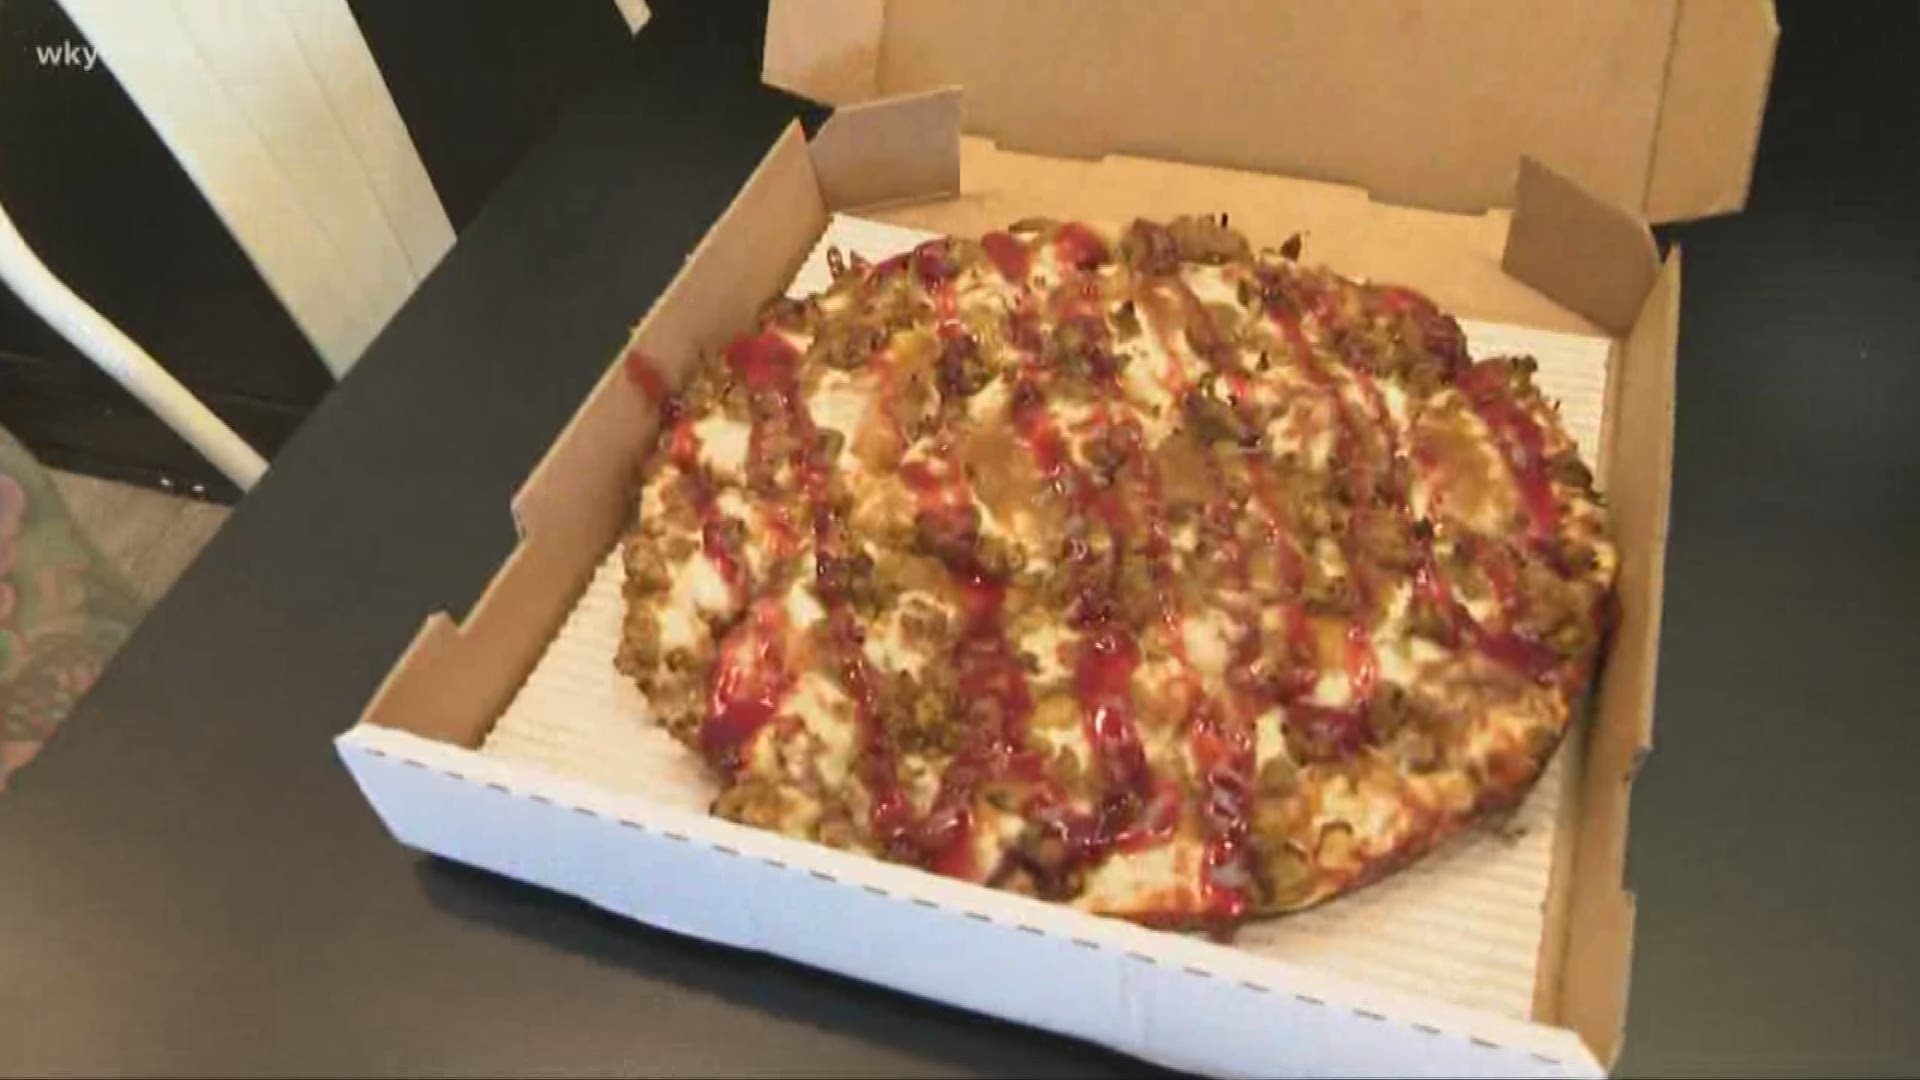 Ohio Pie Co. in Brunswick is crafting 'Turkey Day' pizzas with all the traditional Thanksgiving ingredients like mashed potatoes and cranberry sauce.